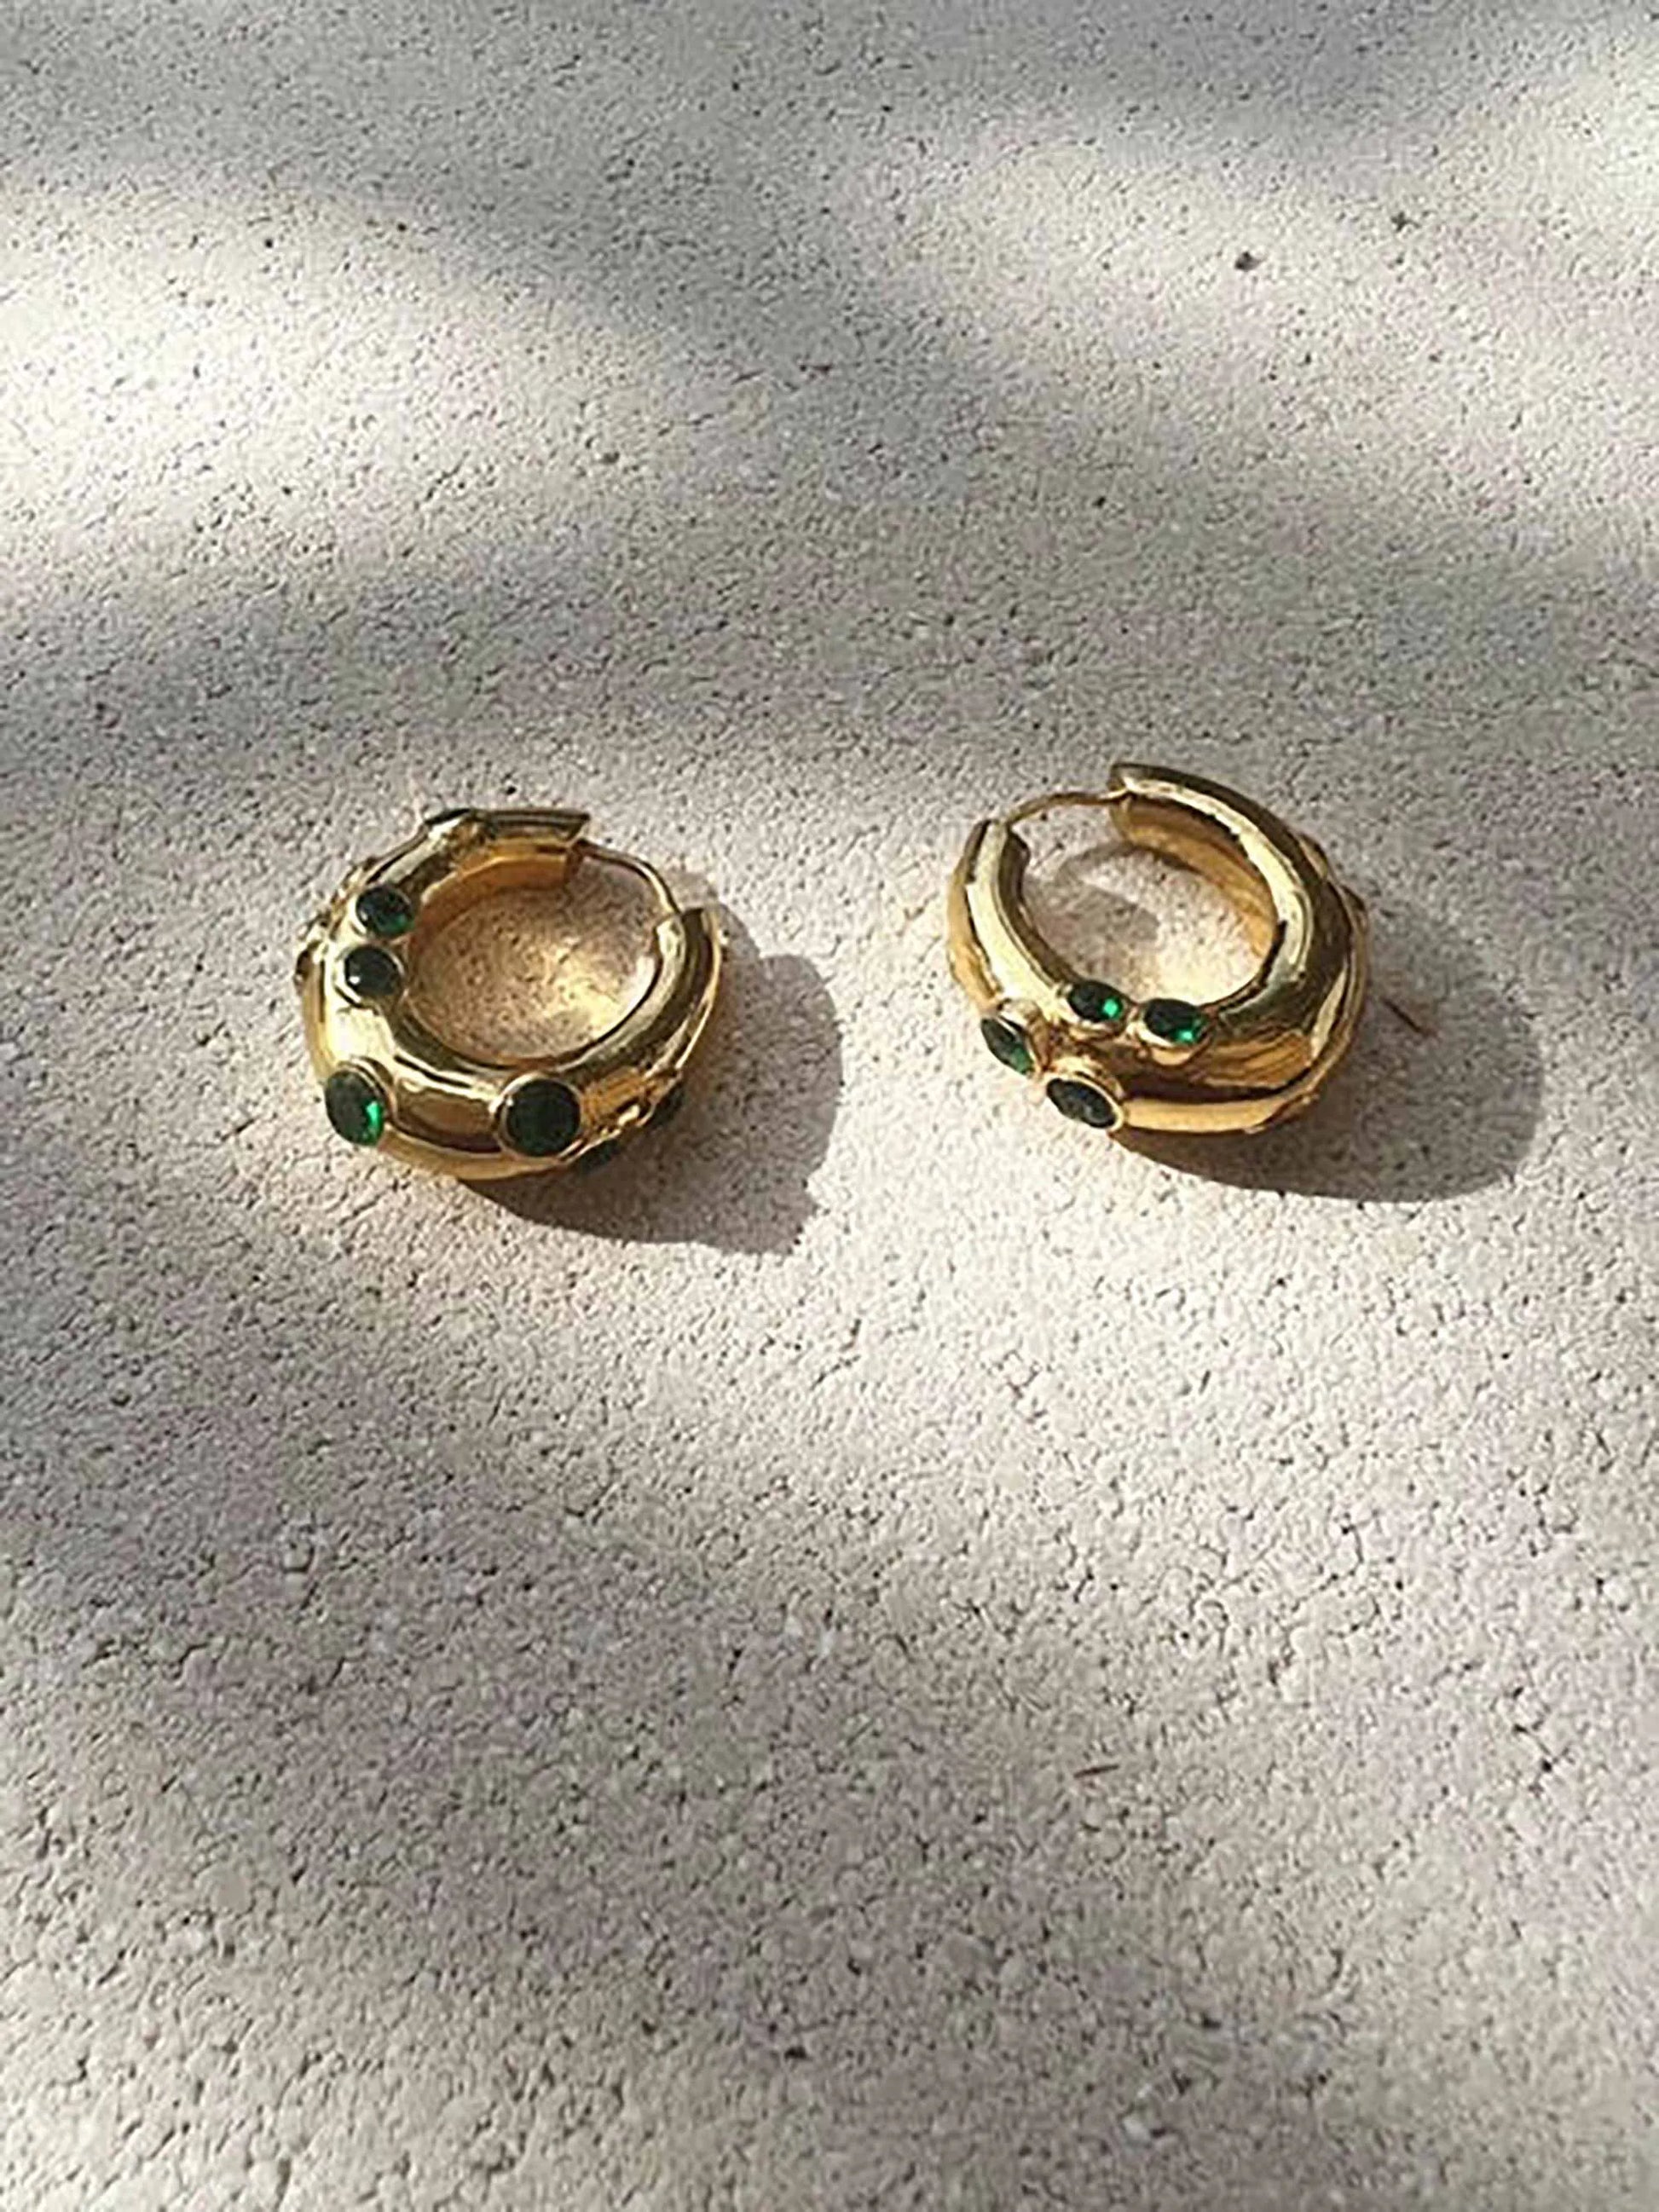 A pair of SHYLA - Oren Hoops - Gold earrings with emerald stones.